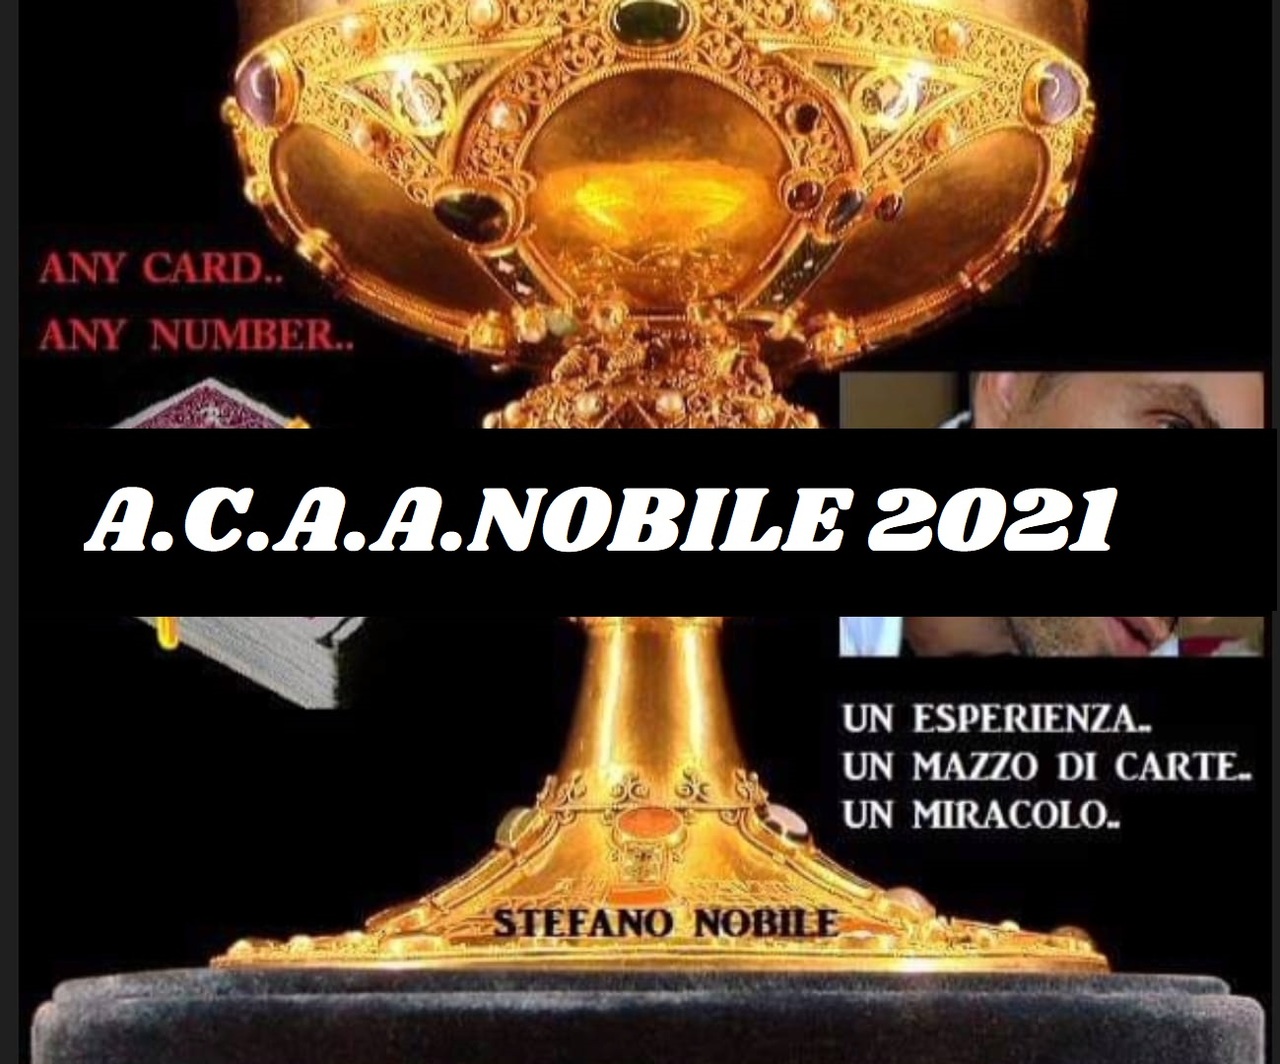 A.C.A.A.Nobile 2021 by Stefano Nobile (Instant Download)